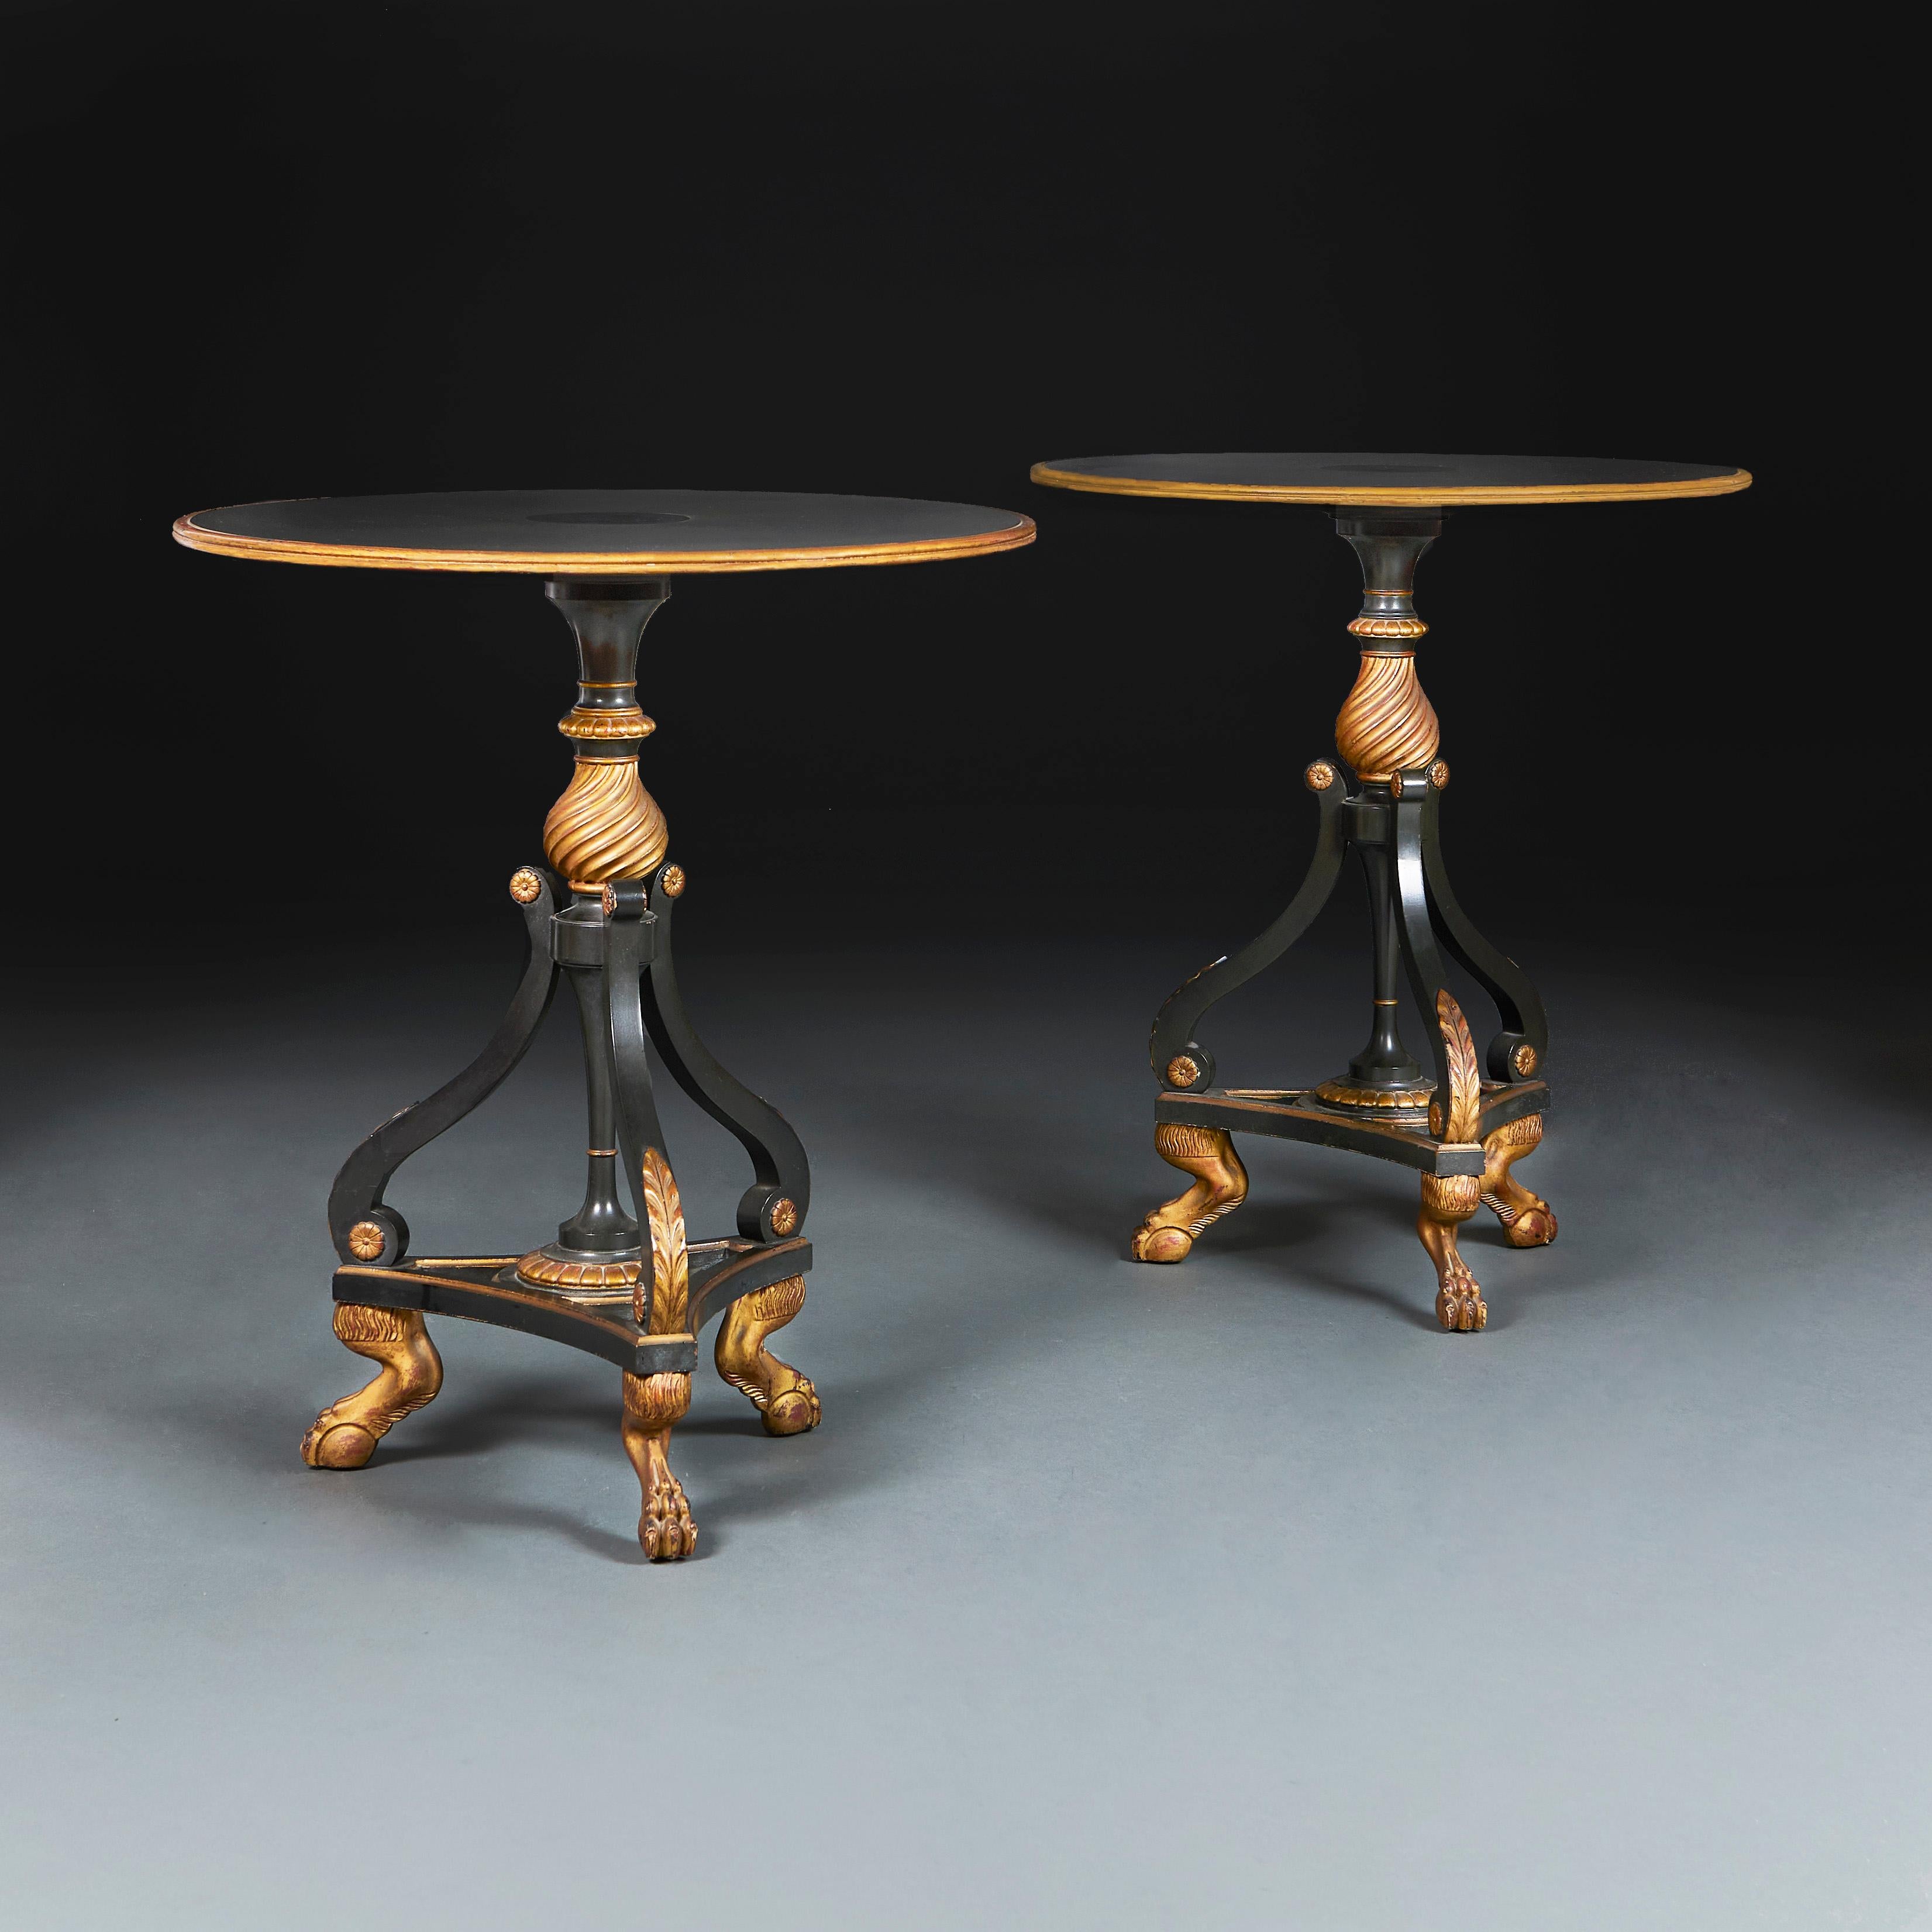 England, circa 1900

An unusual pair of Edwardian circular ebonised and gilded occasional tables in the Regency style, with tripod bases all supported on hairy paw feet.

Height 68.00cm
Diameter 61.00cm